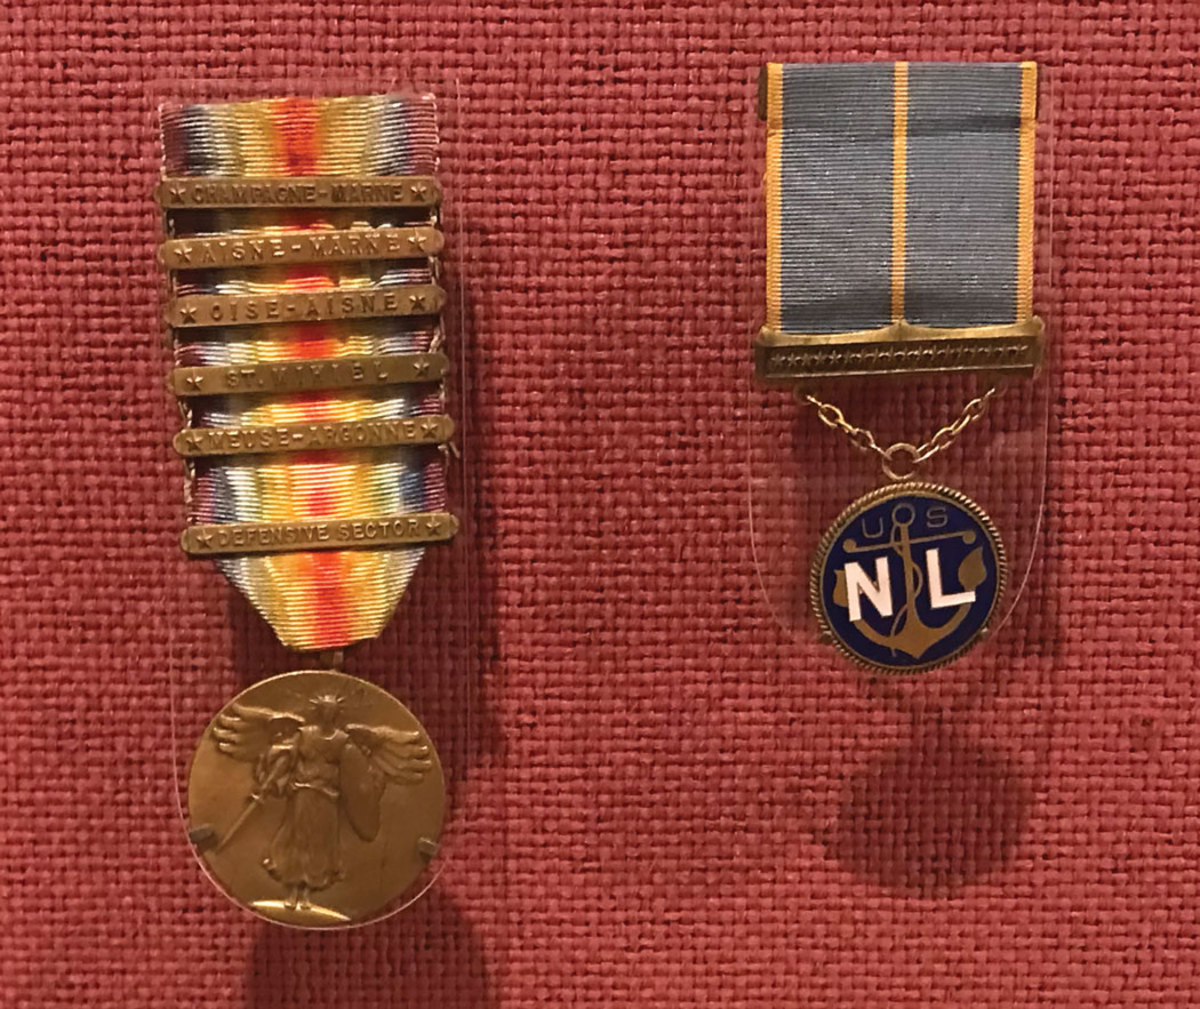 Elizabeth Collins Lee, class of 1896, served as a nurse in France during World War I. She earned a citation of merit for her courage in carrying wounded men to safety while under enemy fire and these medals: the Royal Red Cross of France medal, left, and the U.S. Navy League medal.